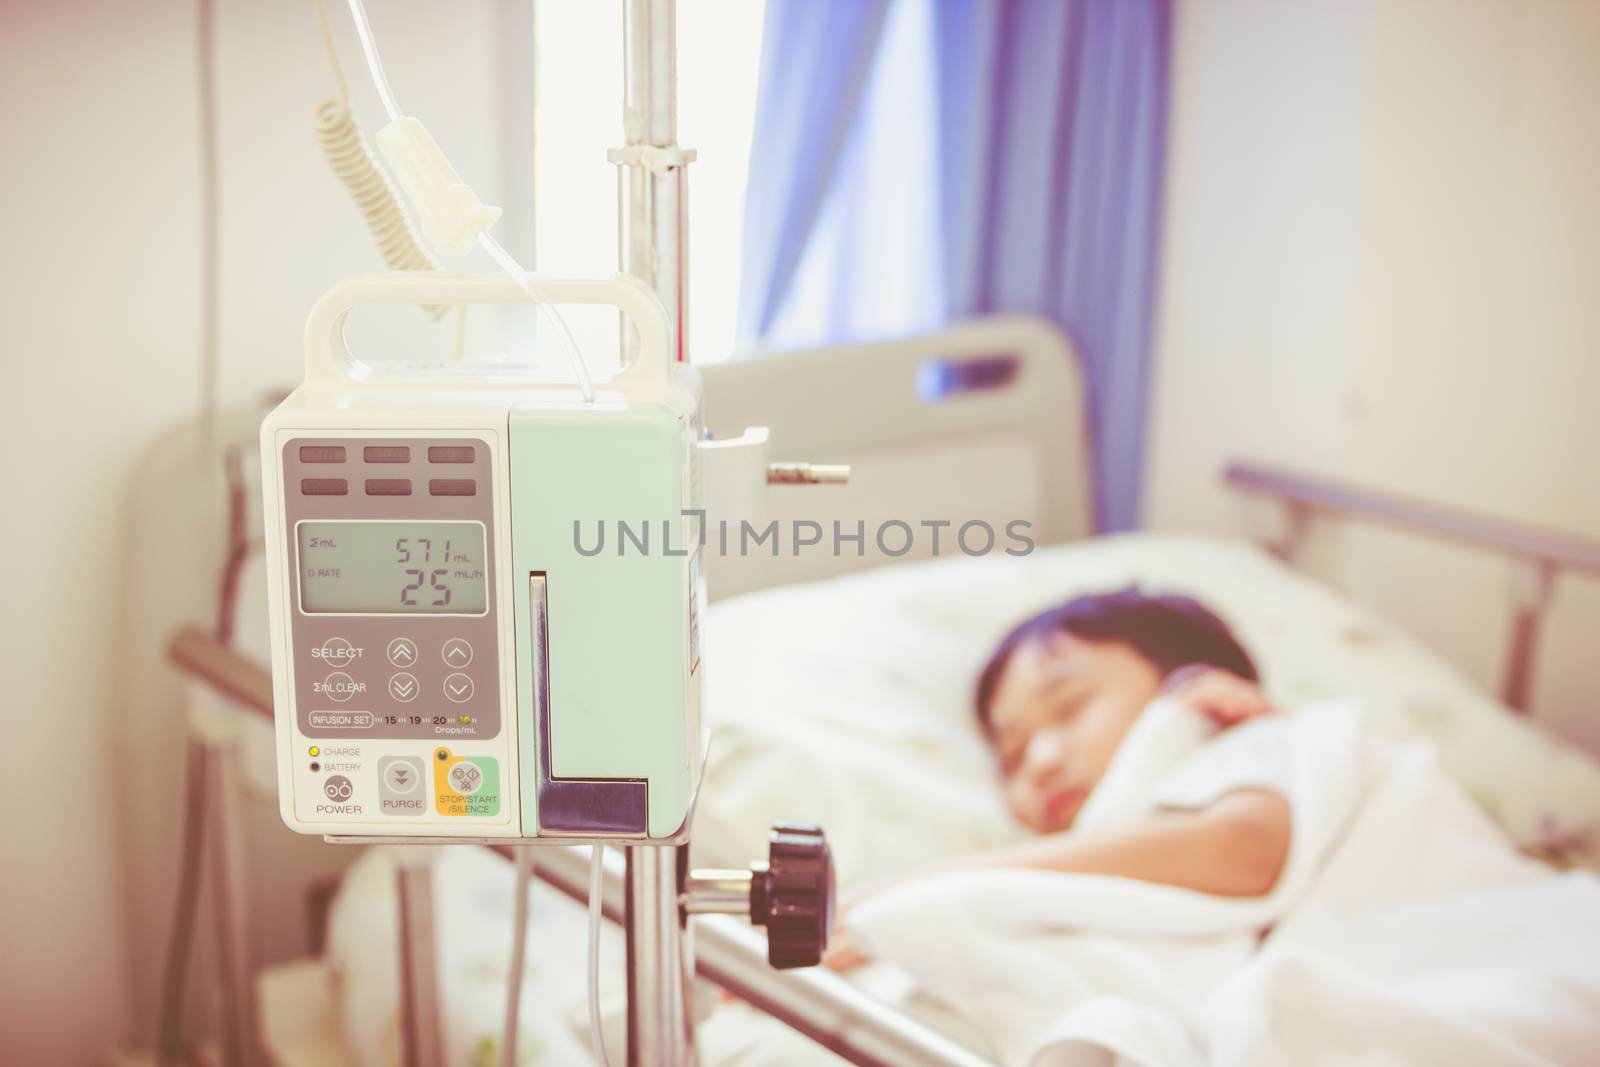 Illness asian boy lying on sickbed in hospital with infusion pump intravenous IV drip. Shallow depth of field, IV machine in focus, child out of focus. Health care and medical concept. Vintage style.